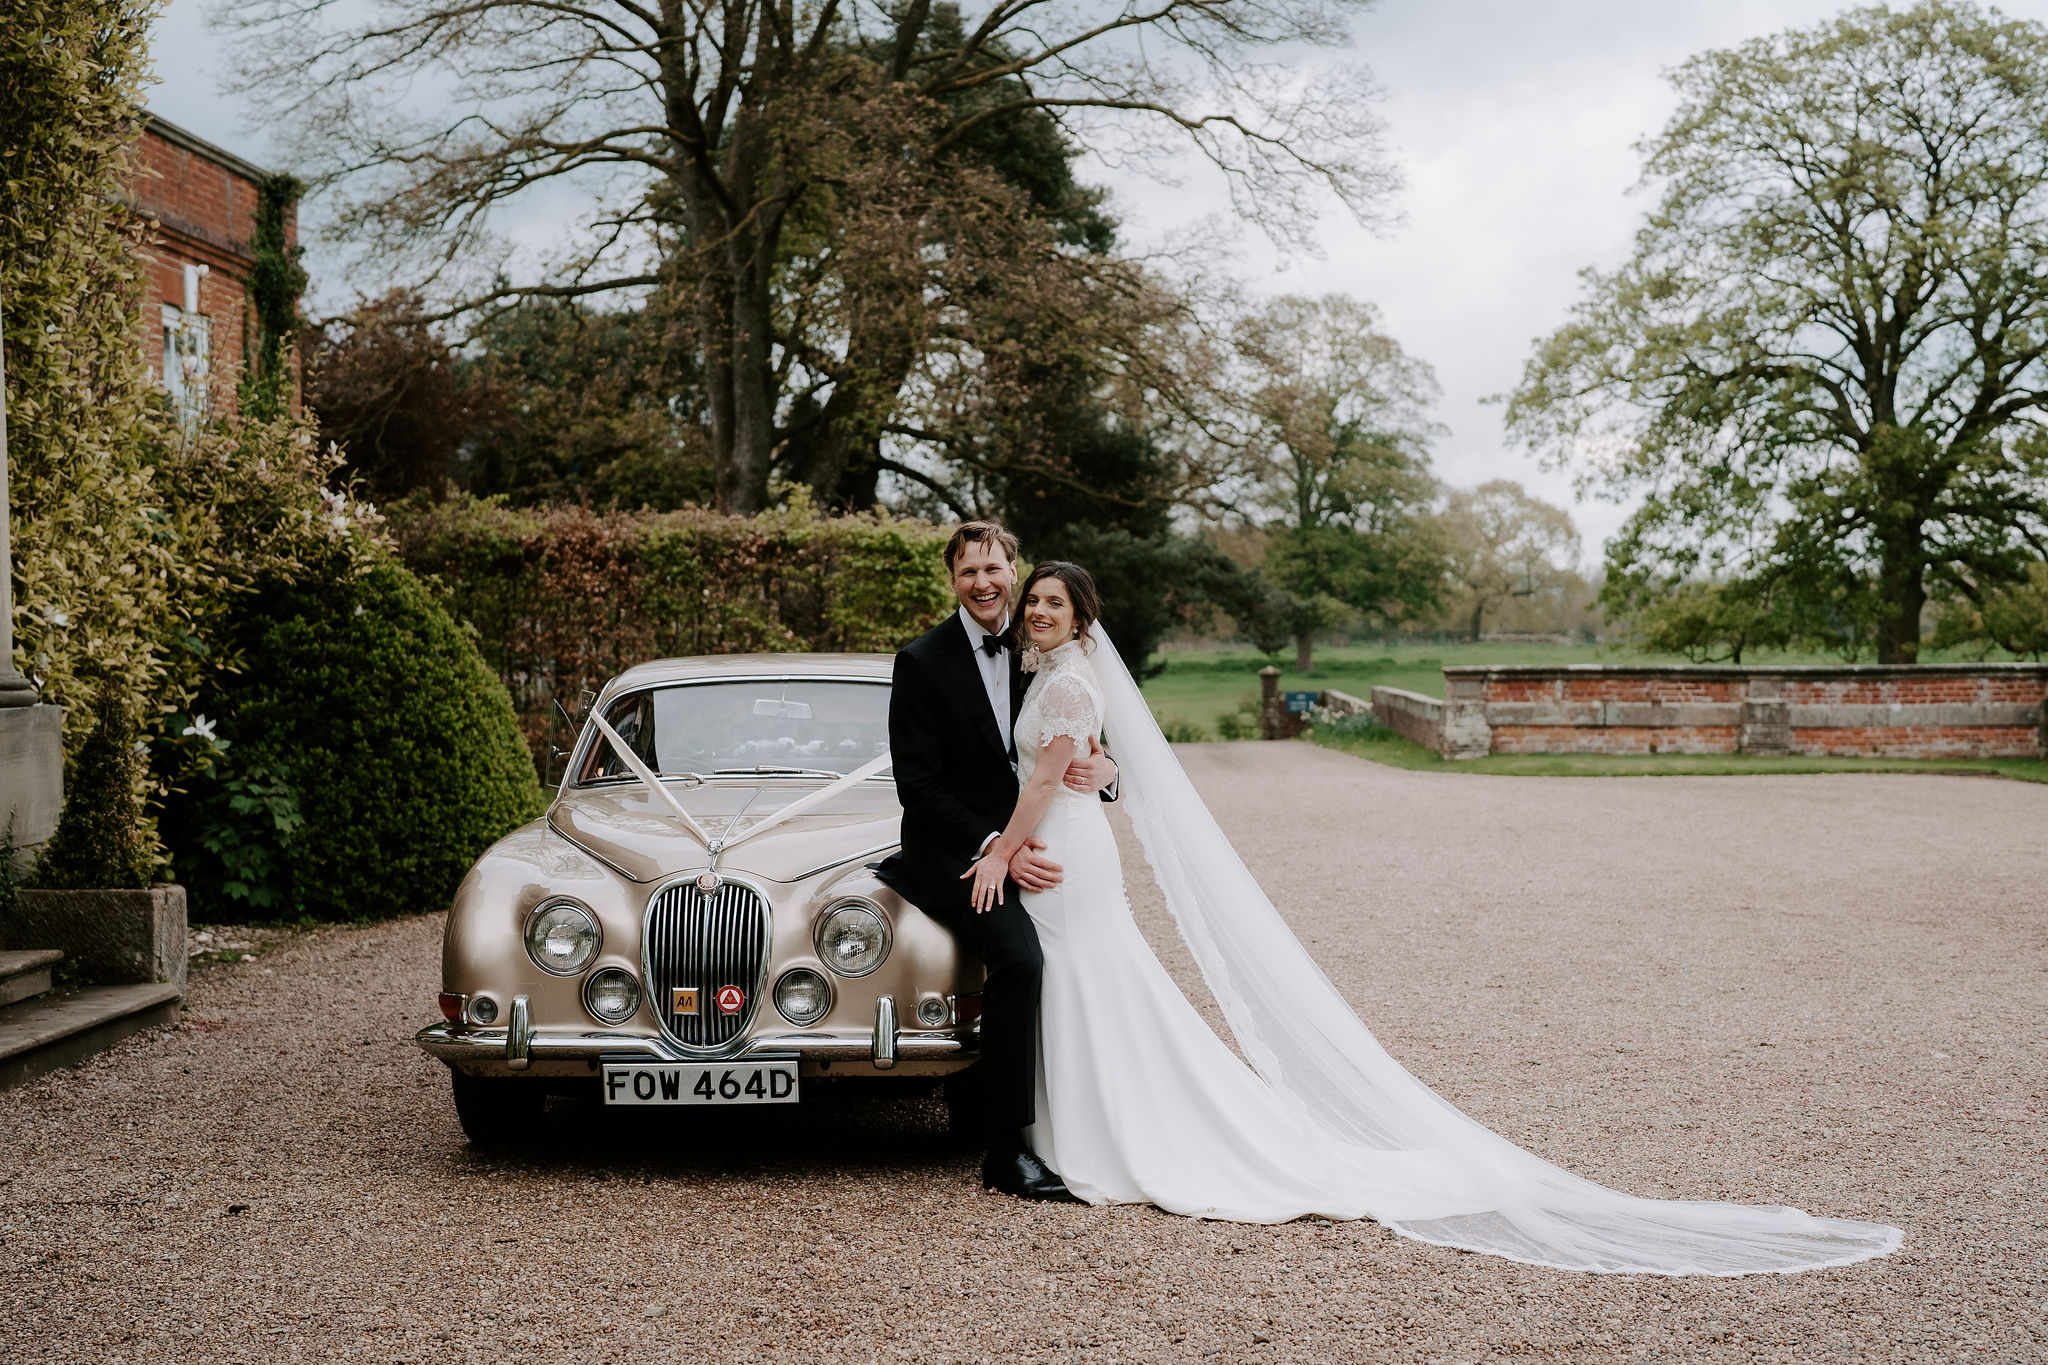 A groom wearing black tie and a bride wearing a lace short sleeved dress pose next to an old vintage car which is parked outside a redbrick Georgian mansion